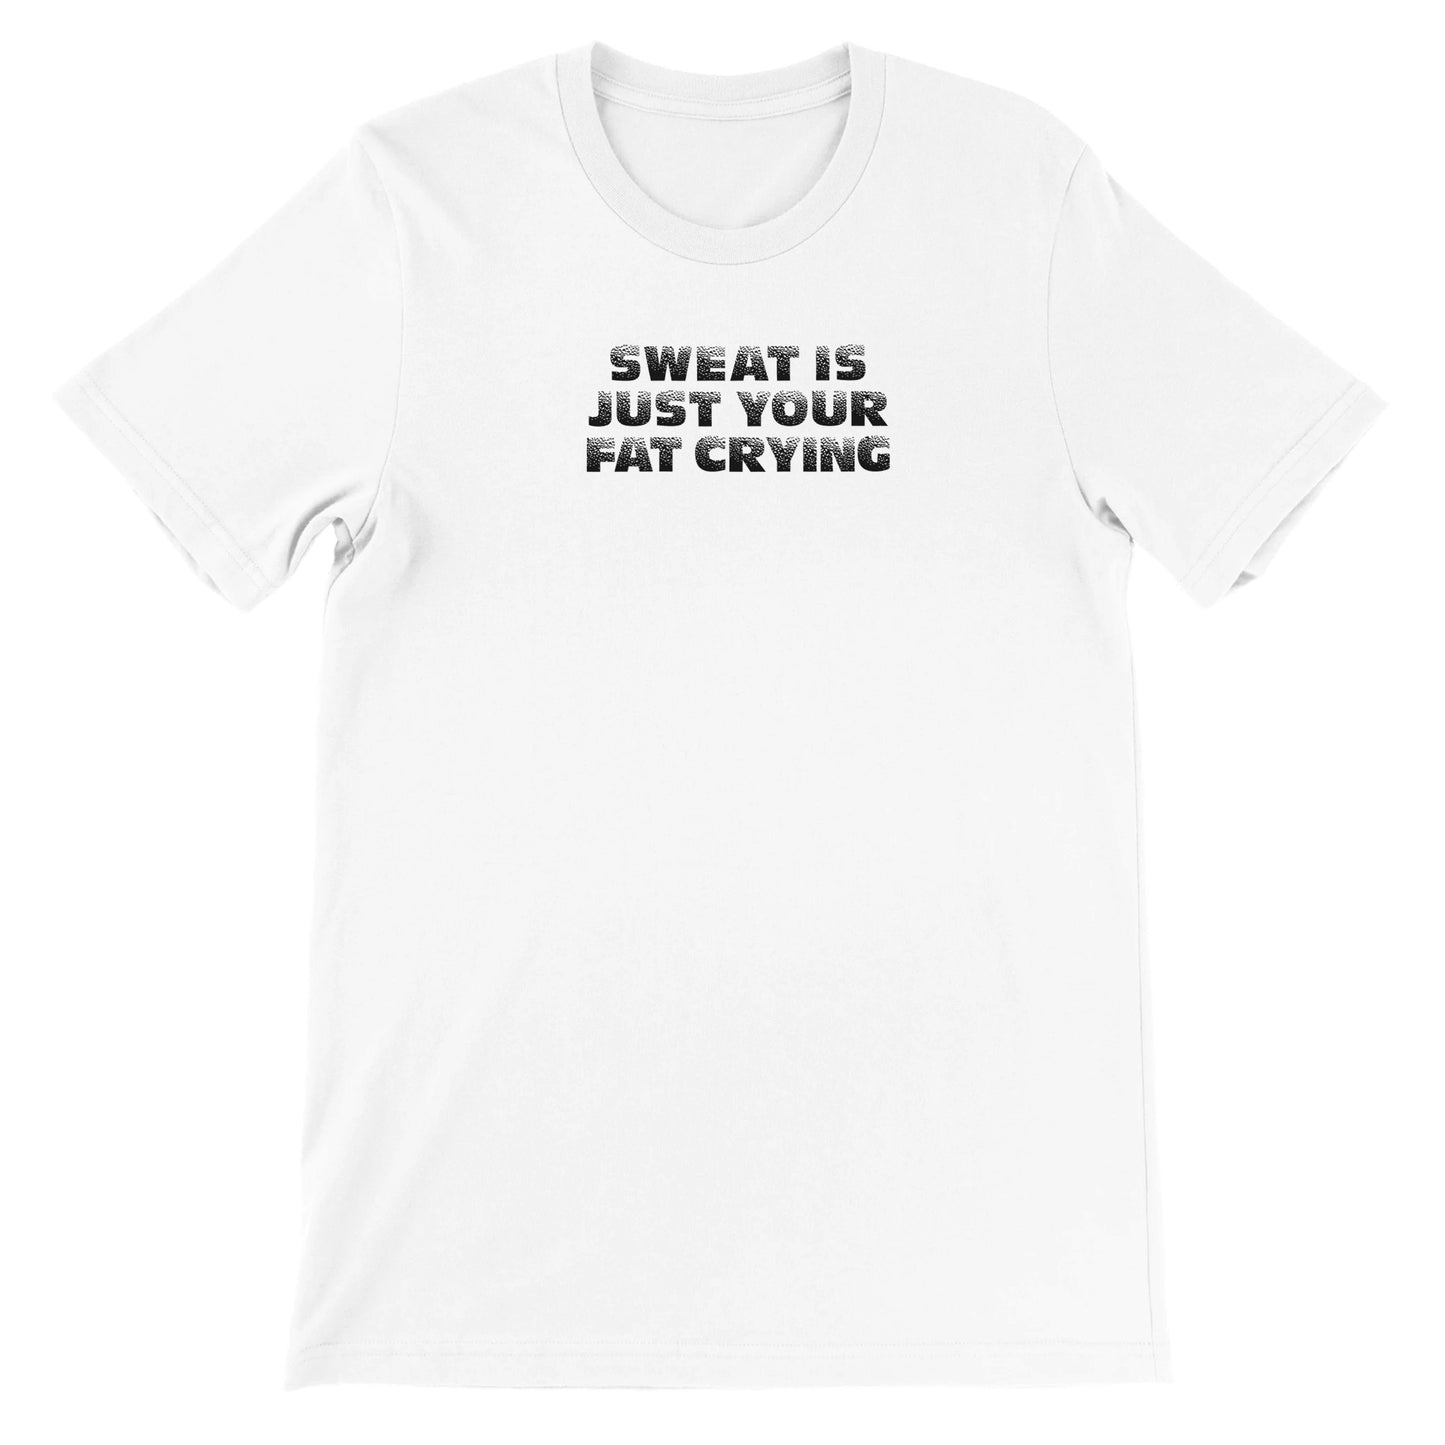 SWEAT IS JUST YOUR FAT CRYING